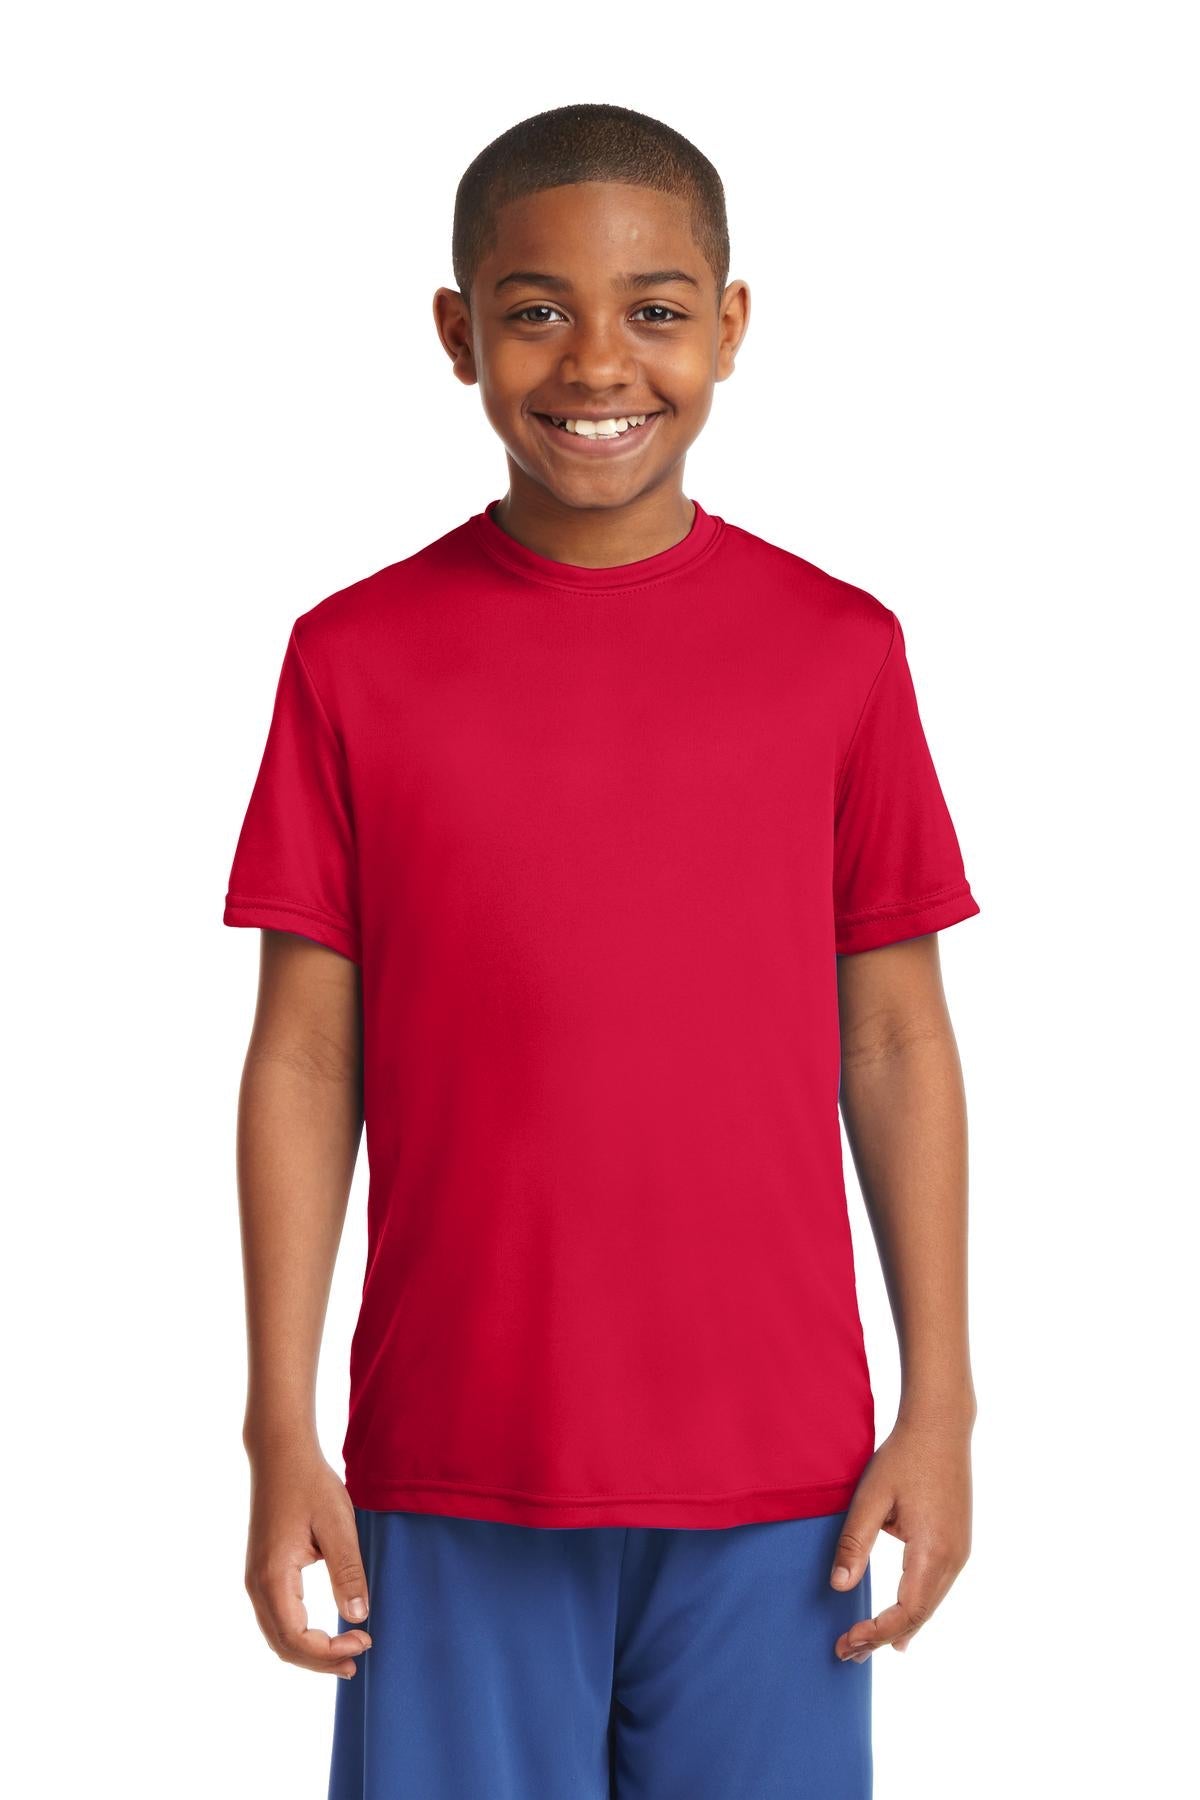 Sport-Tek® Youth PosiCharge® Competitor™ Tee. YST350 [True Red] - DFW Impression